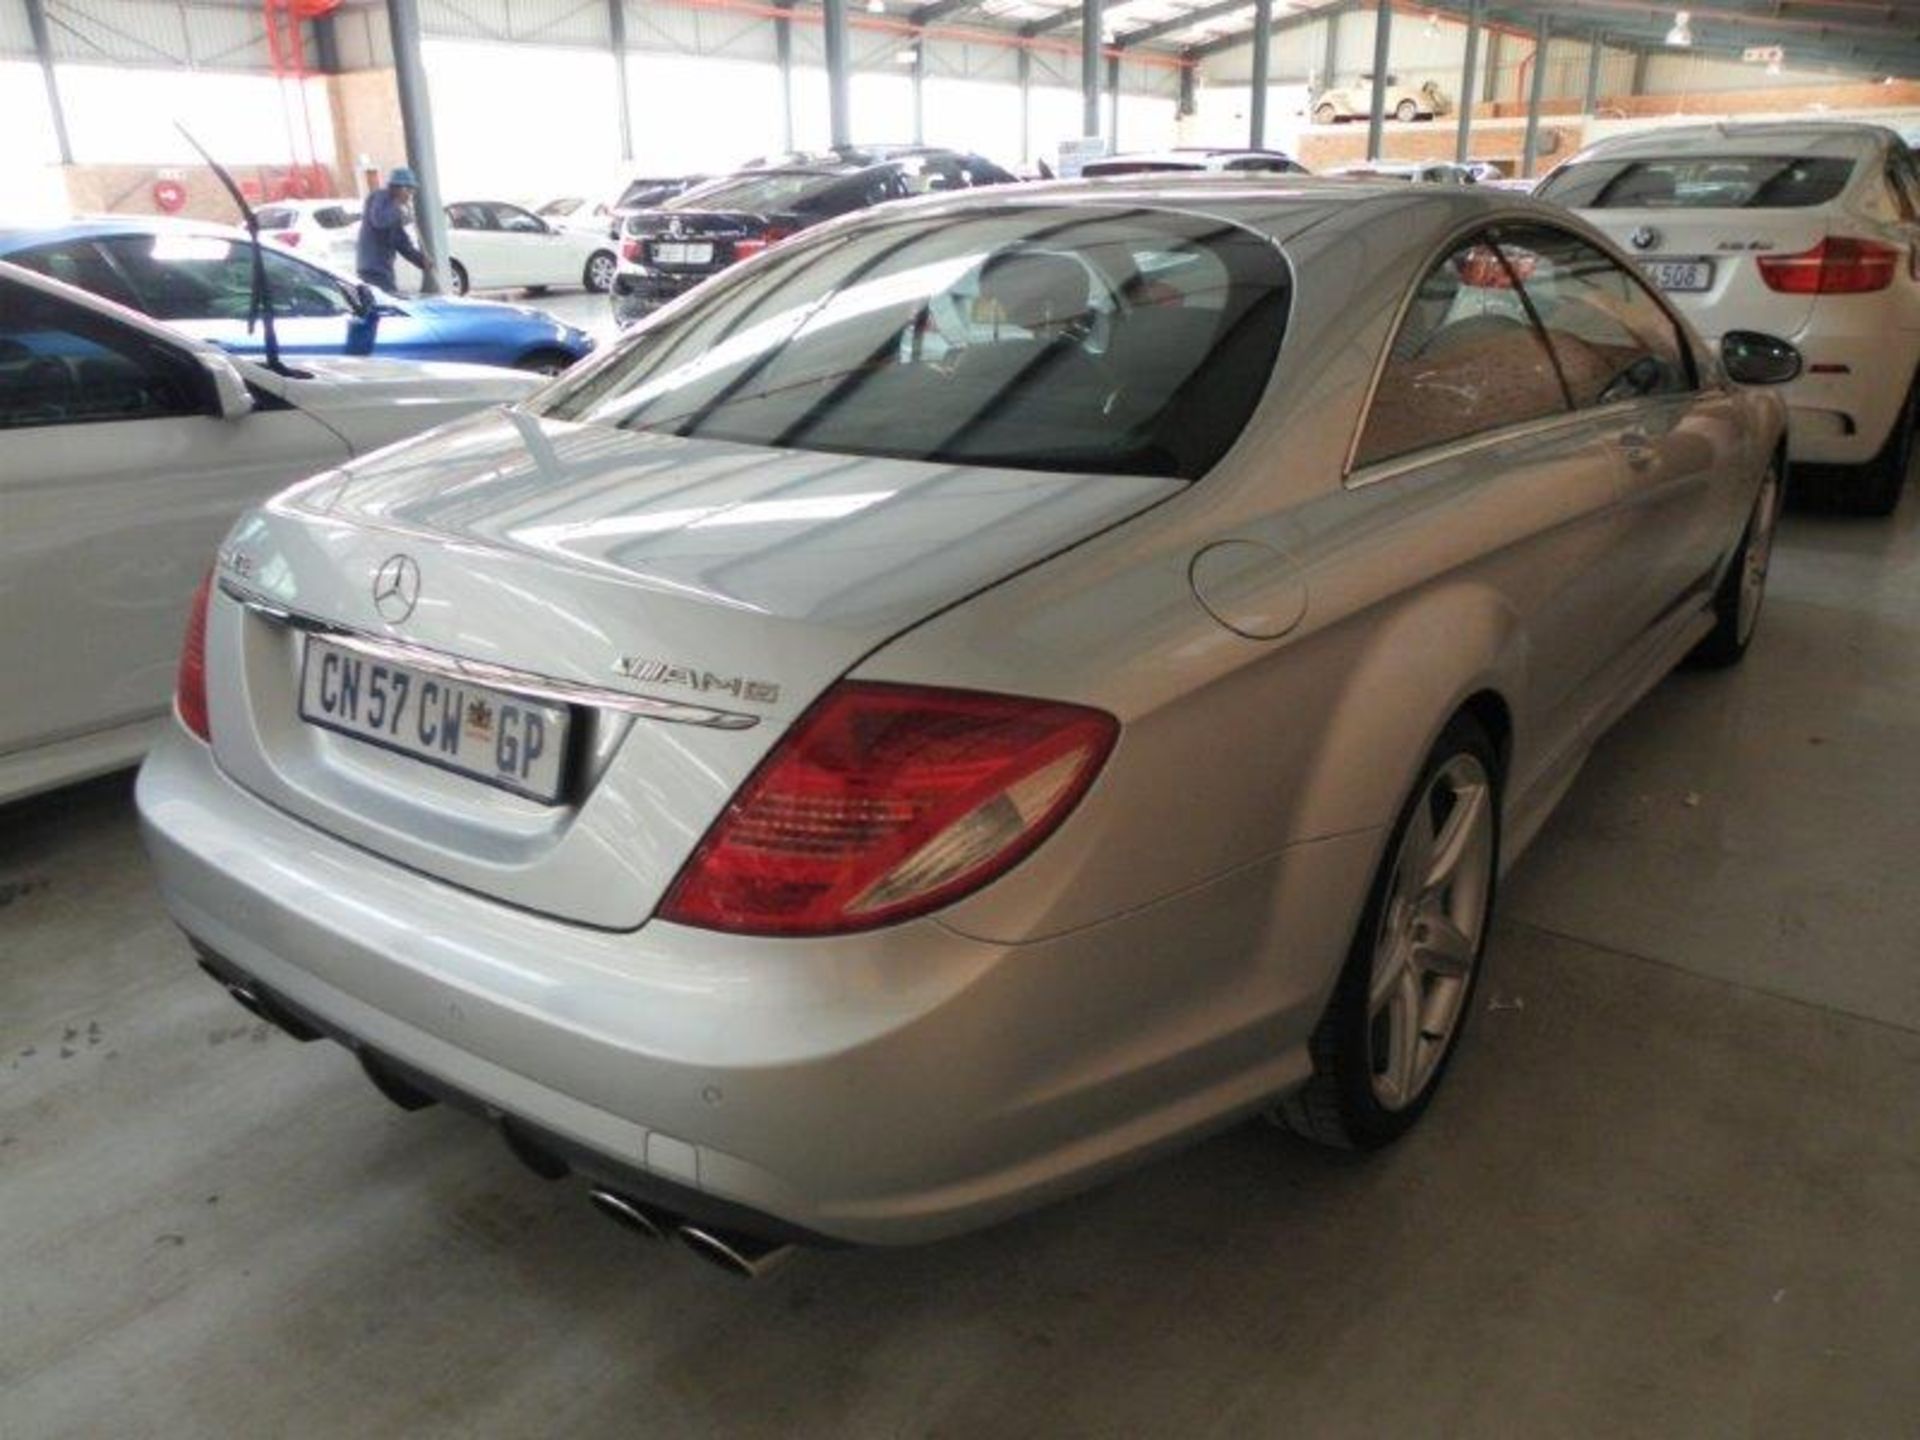 2009 CN57CWGP Mercedes-Benz CL63 AMG Coupe Auto (Vin No: WDD2163772A018143 )(Sunroof, Black Leather, - Image 3 of 5